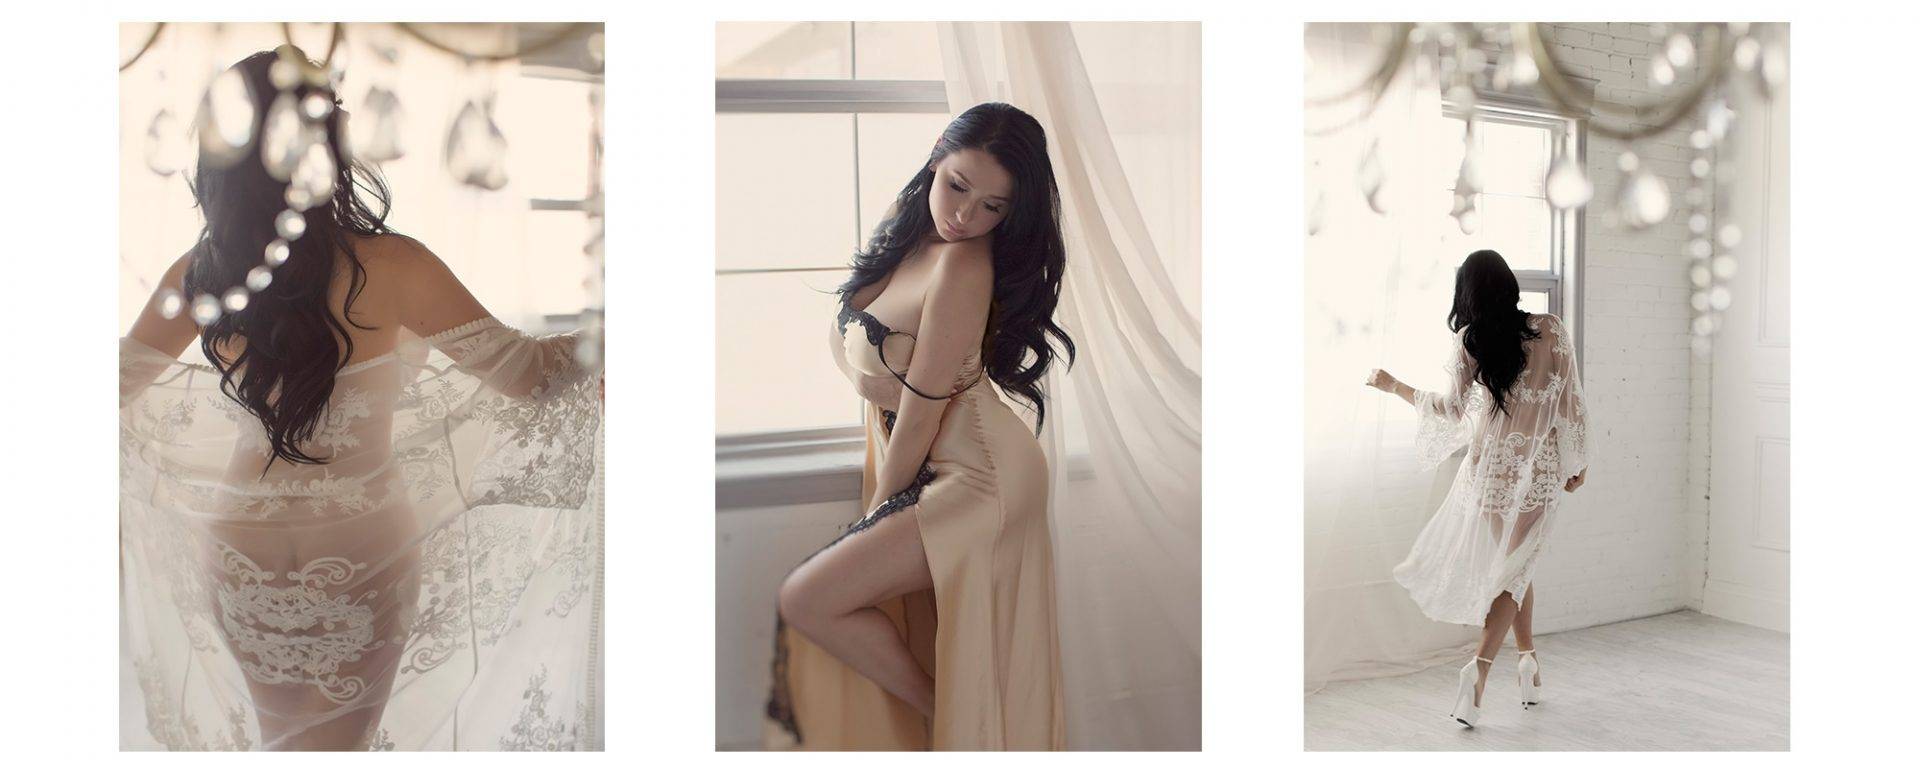 Bridal boudoir photos of a lady wearing a white lace robe and a gold nightgown.